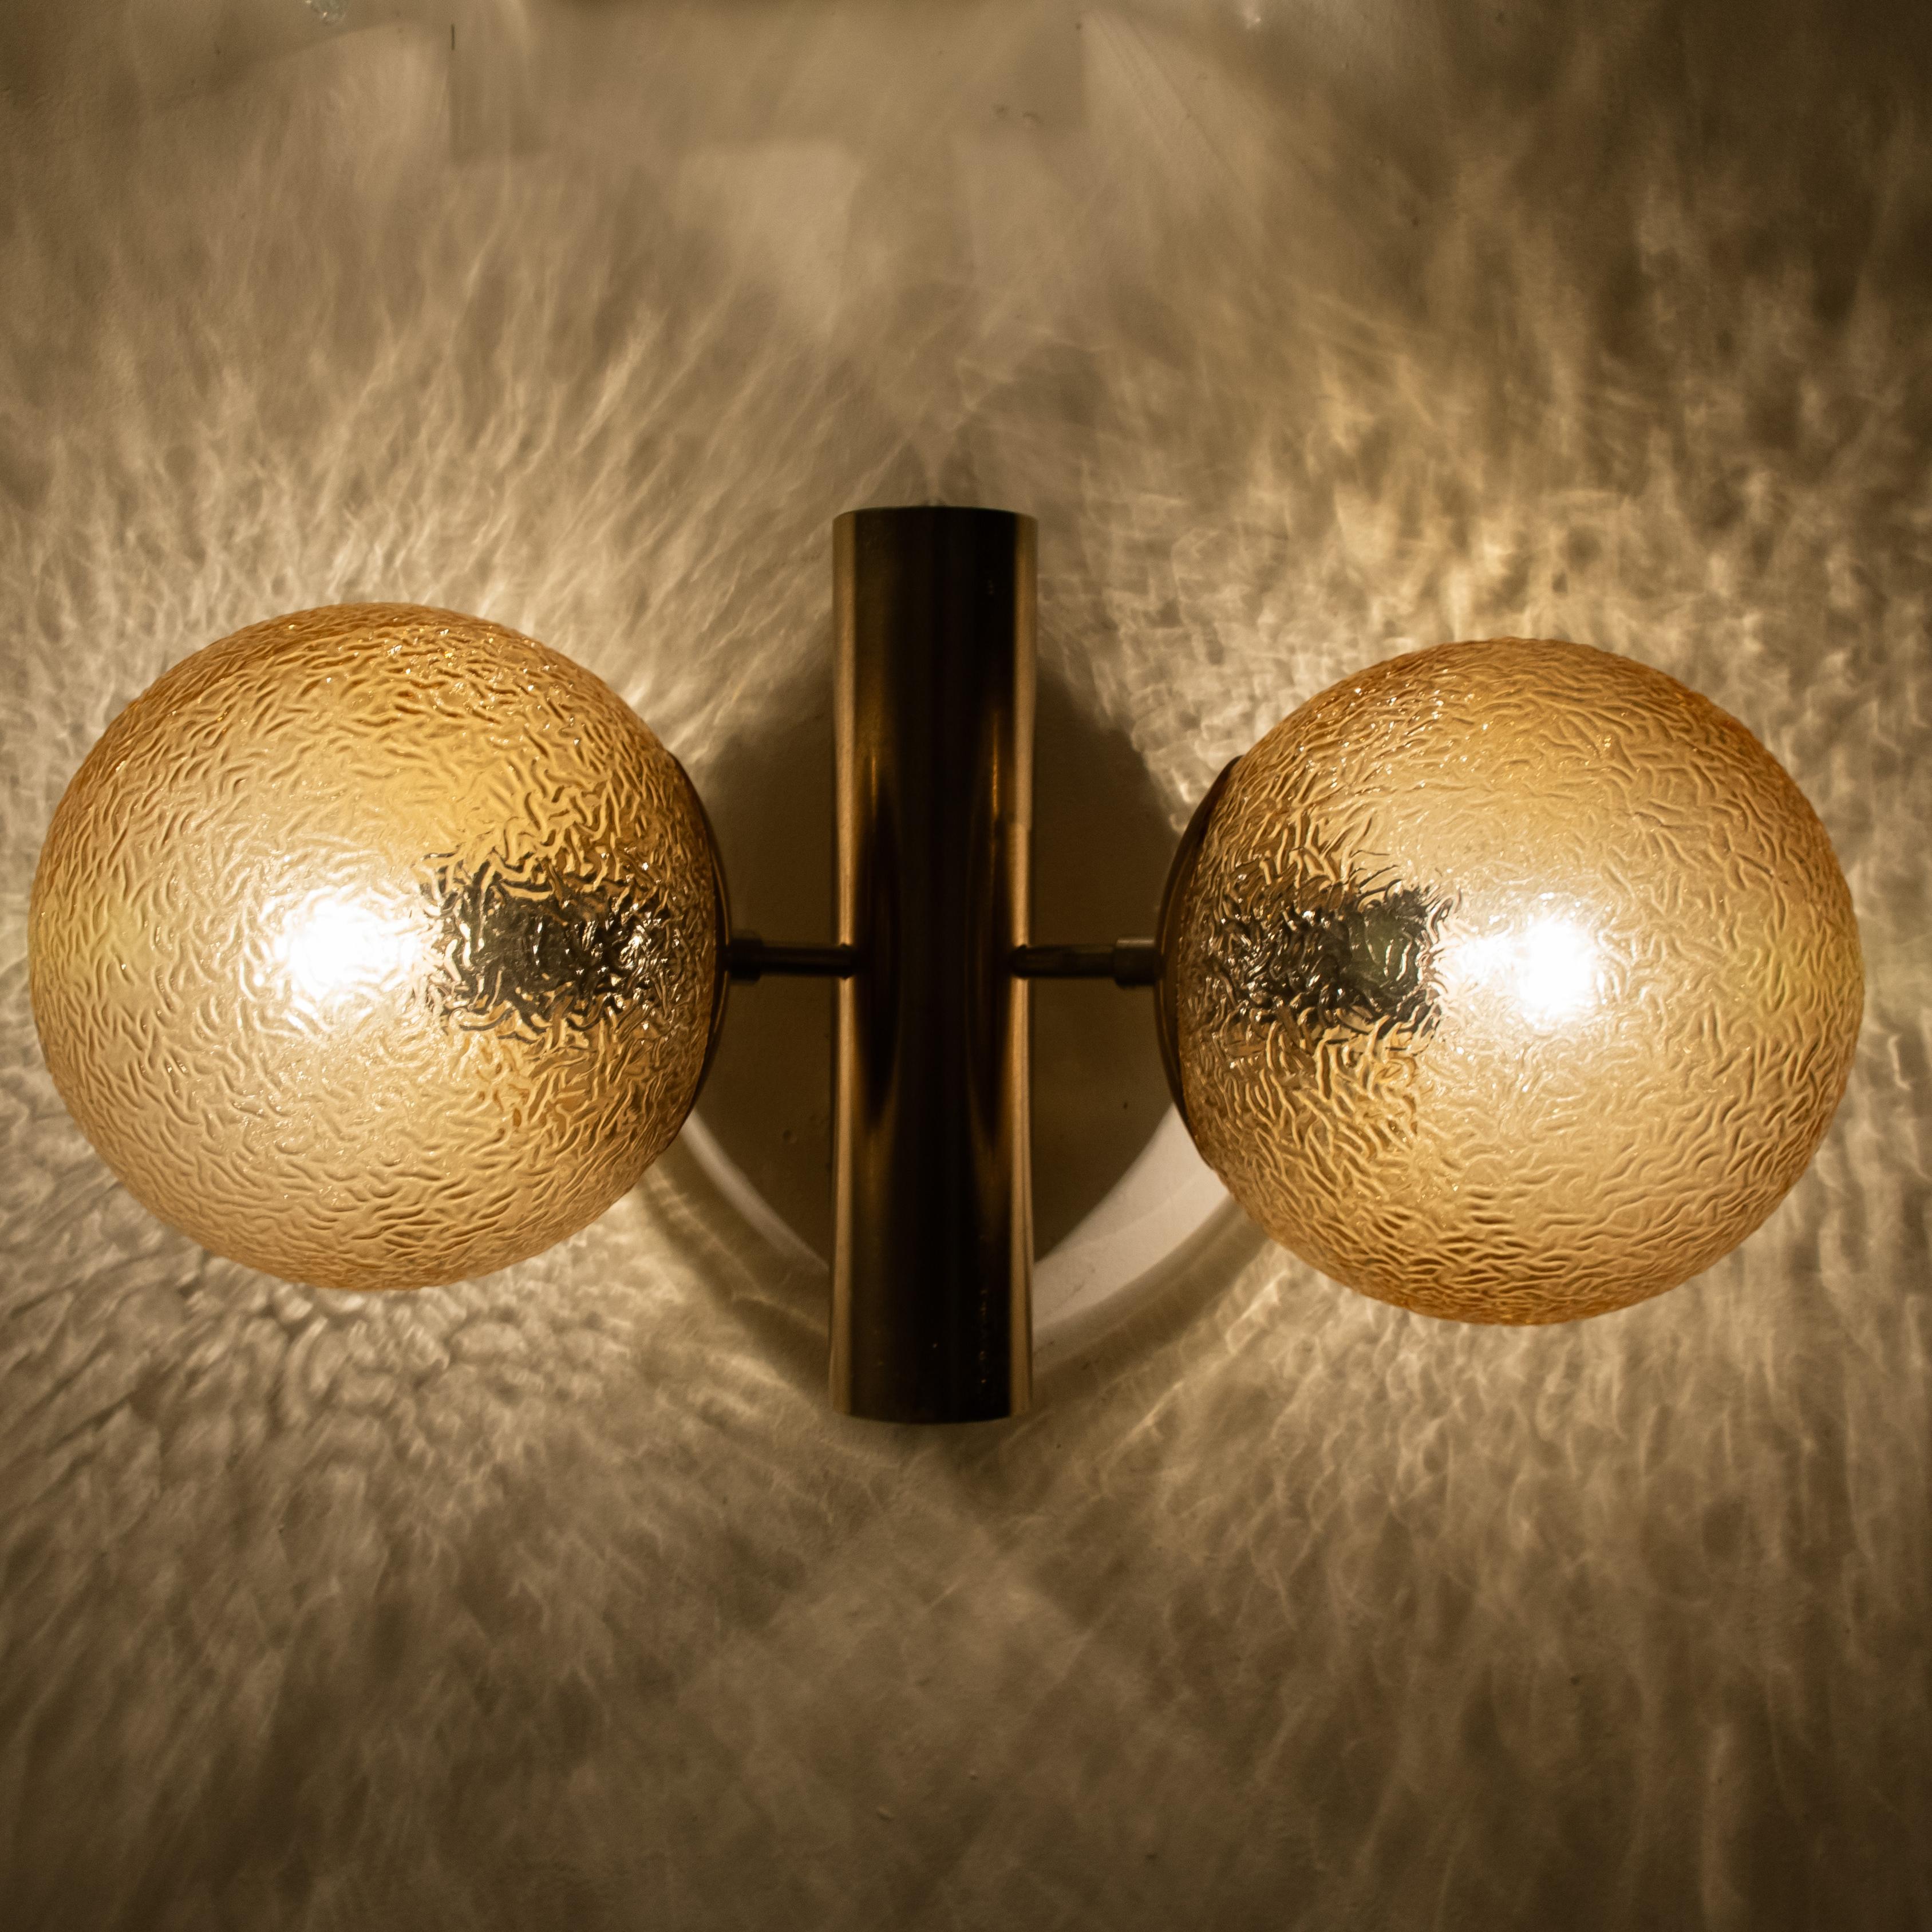 Pressed 1 of the 4 Molecular Wall Lights with Amber Glass Globes, 1960s